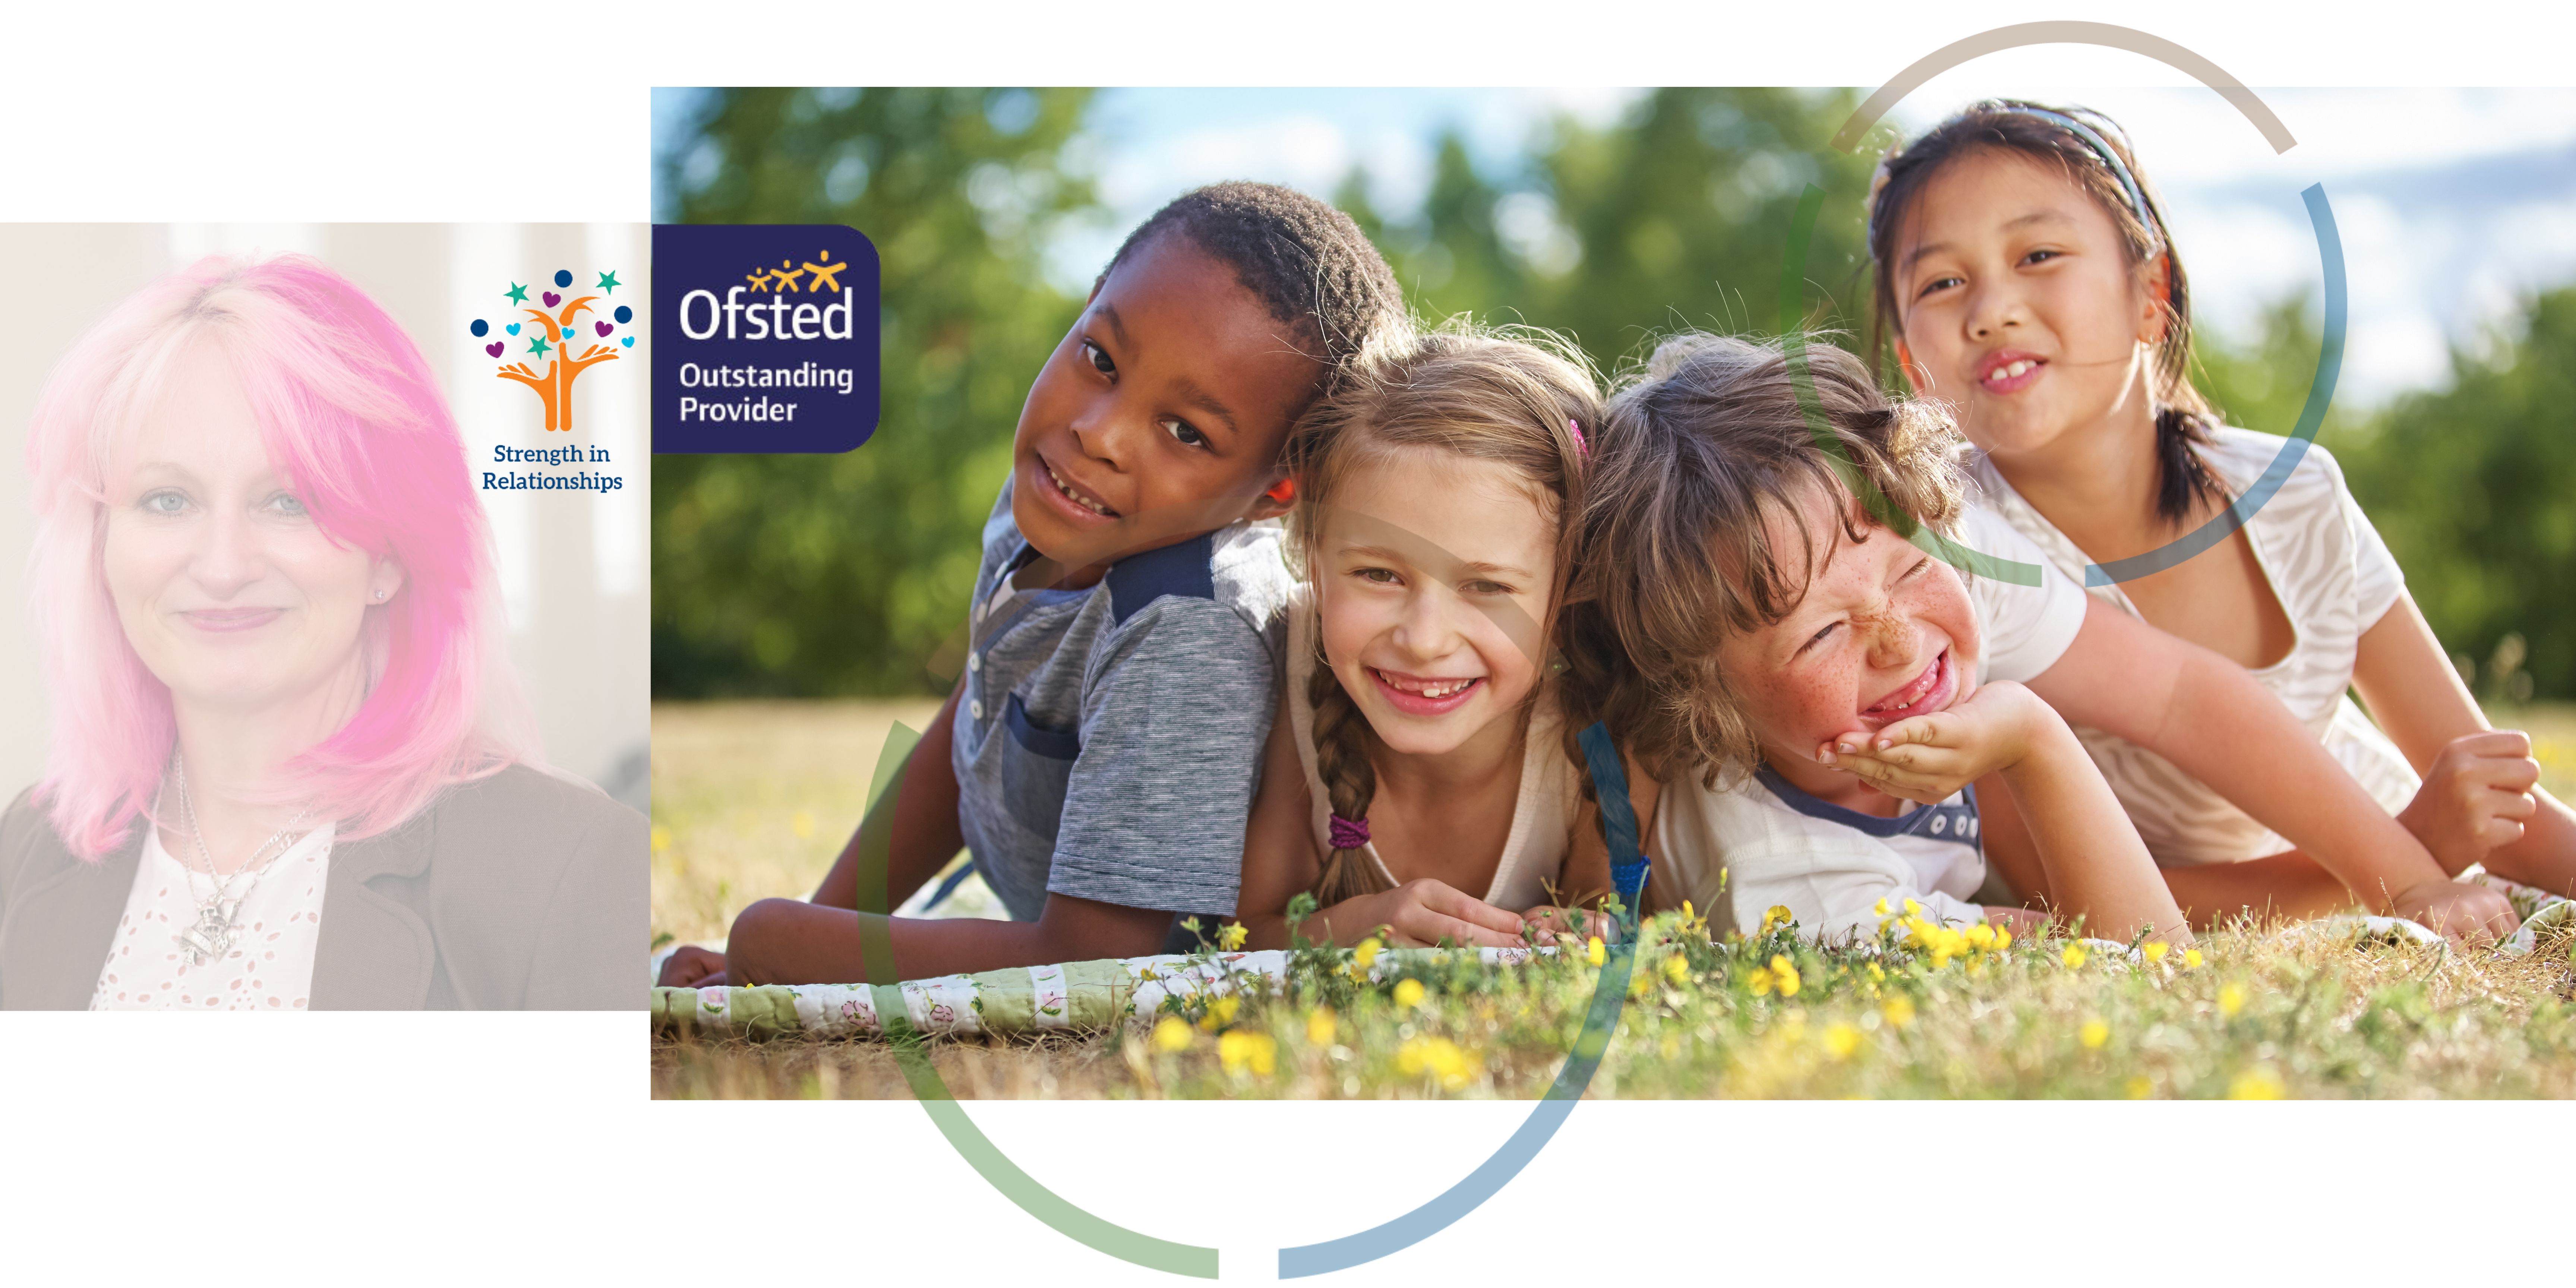 A portrait of a member of the children and families social work team next to an image of children smiling on a picnic blanket with the Ofsted and strength in relationships logos. 